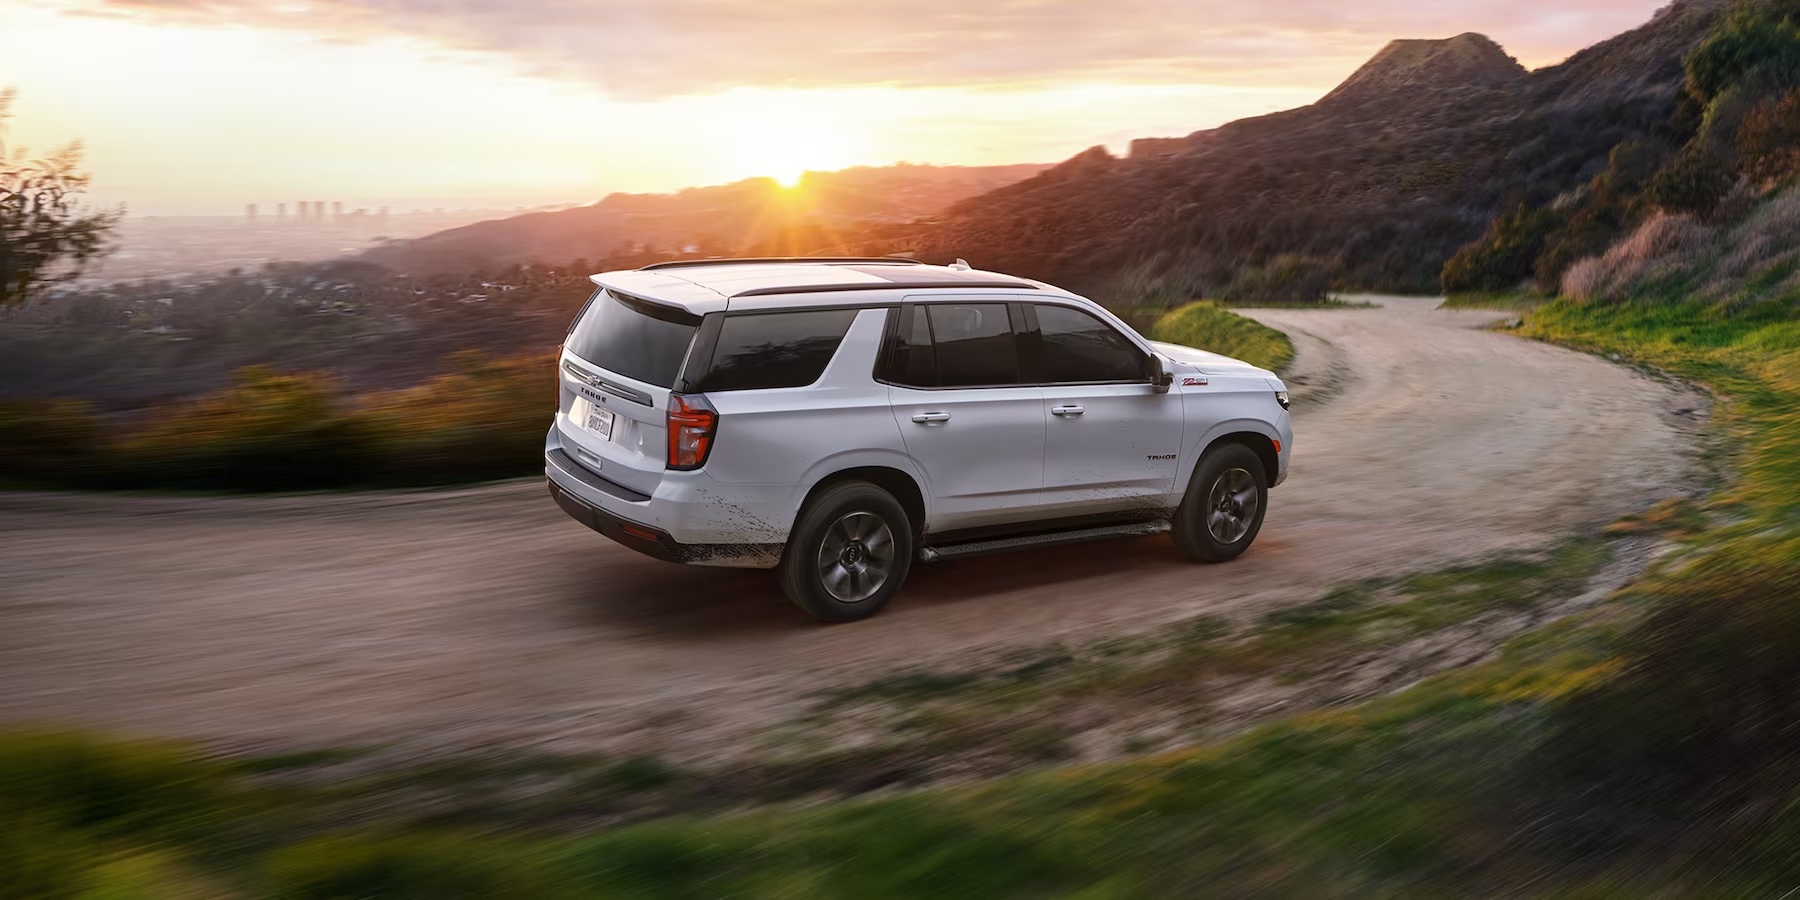 The 2022 Chevrolet Tahoe is driving through an open mountain road at sunset